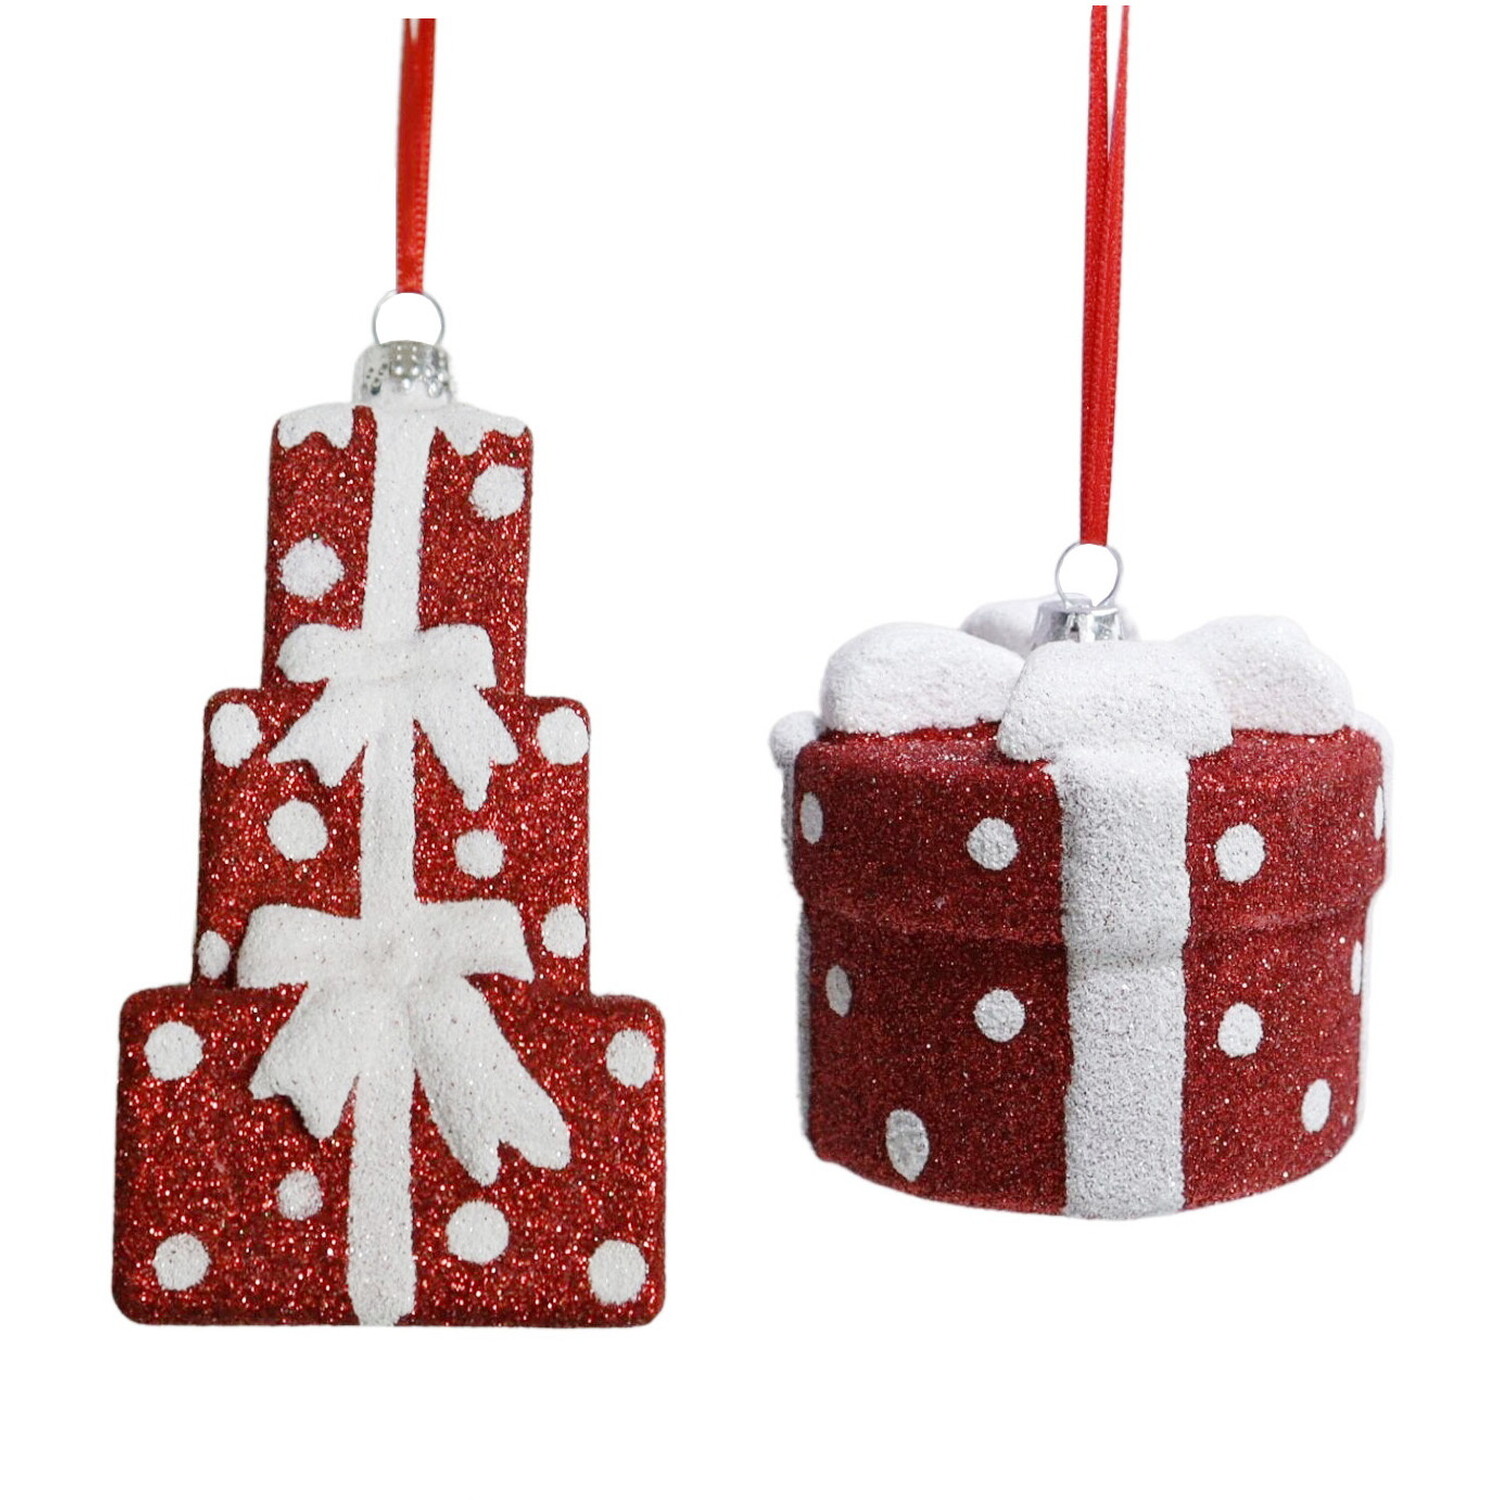 Christmas Glitter Present Decoration - Red Image